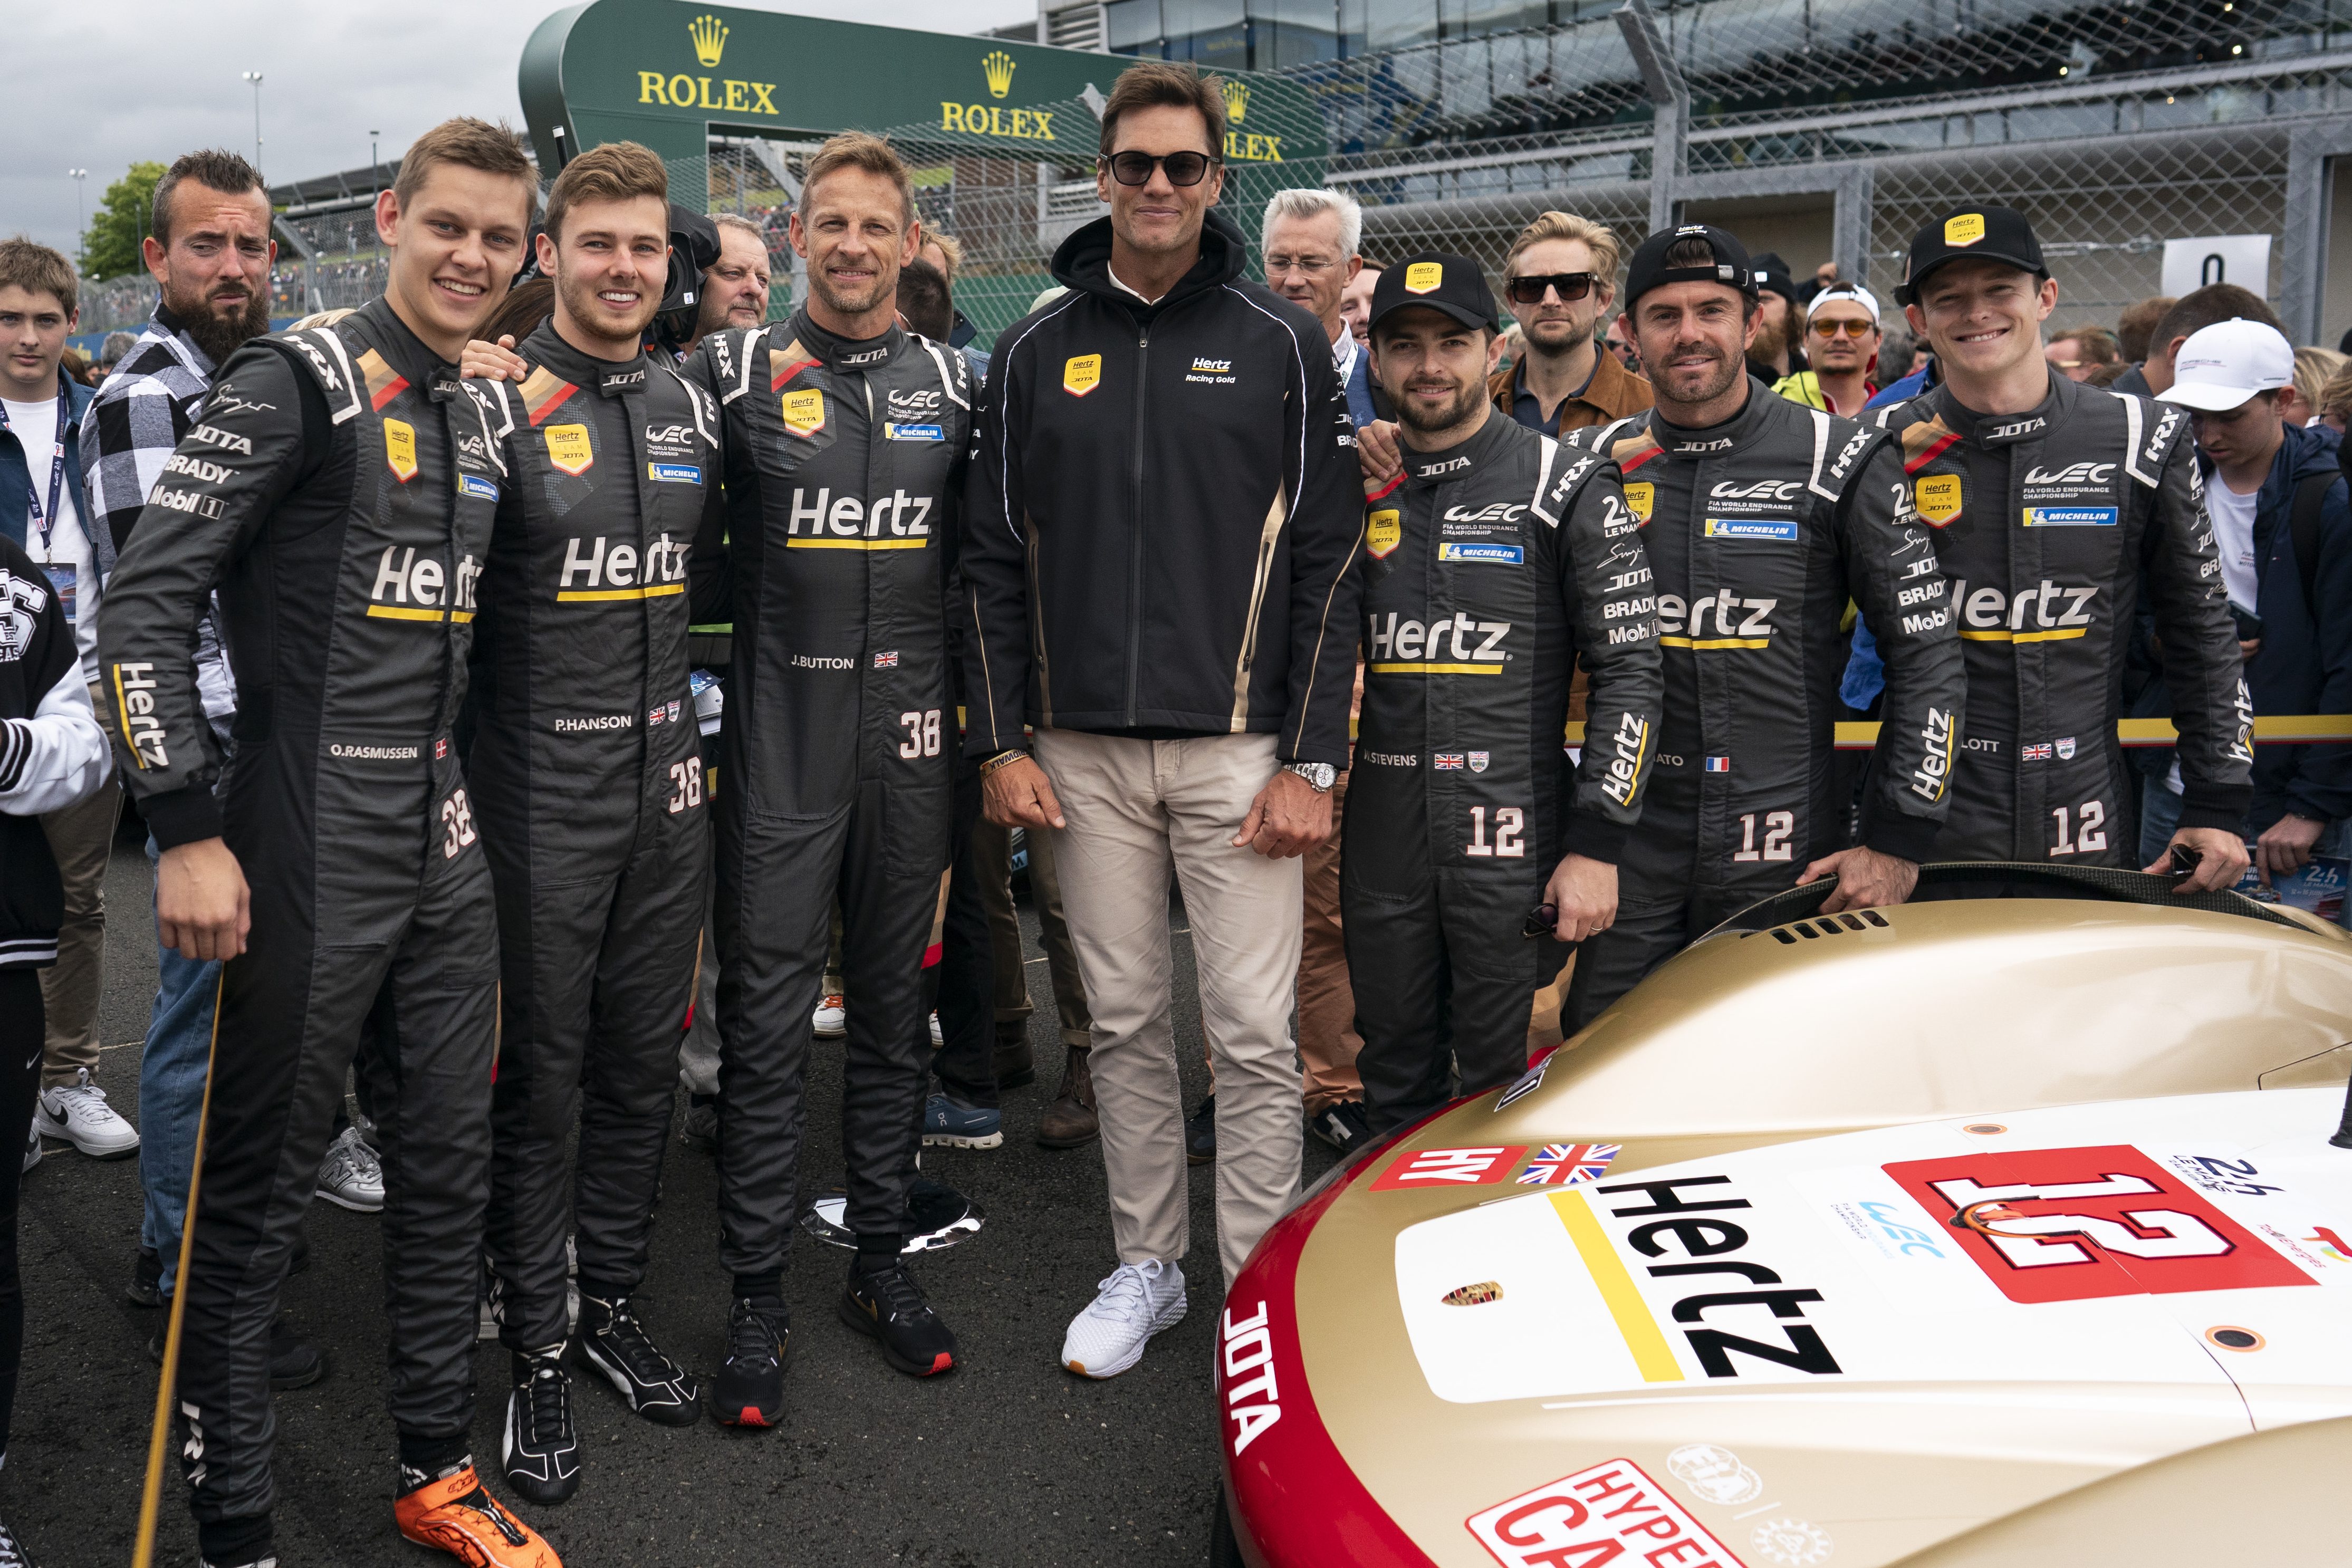 Tom Brady poses with the Hertz Team Jota drivers on the grid at Le Mans 2024